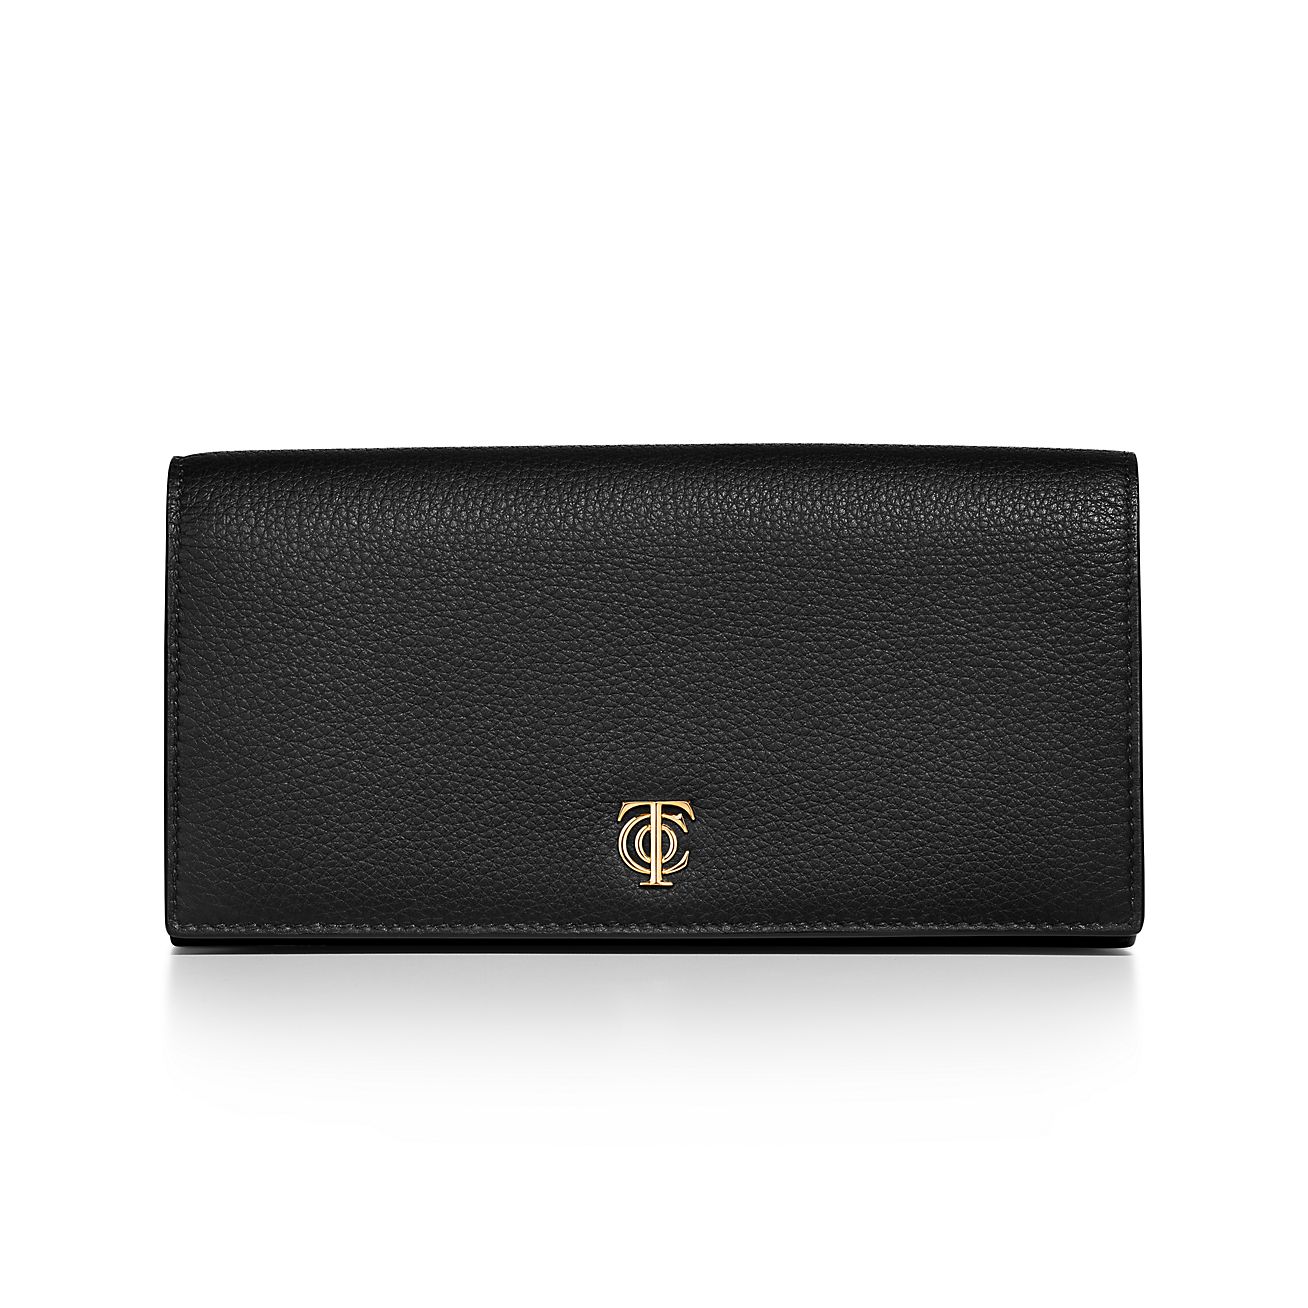 T&CO. Flap Continental Wallet in Black Leather | Tiffany & Co.